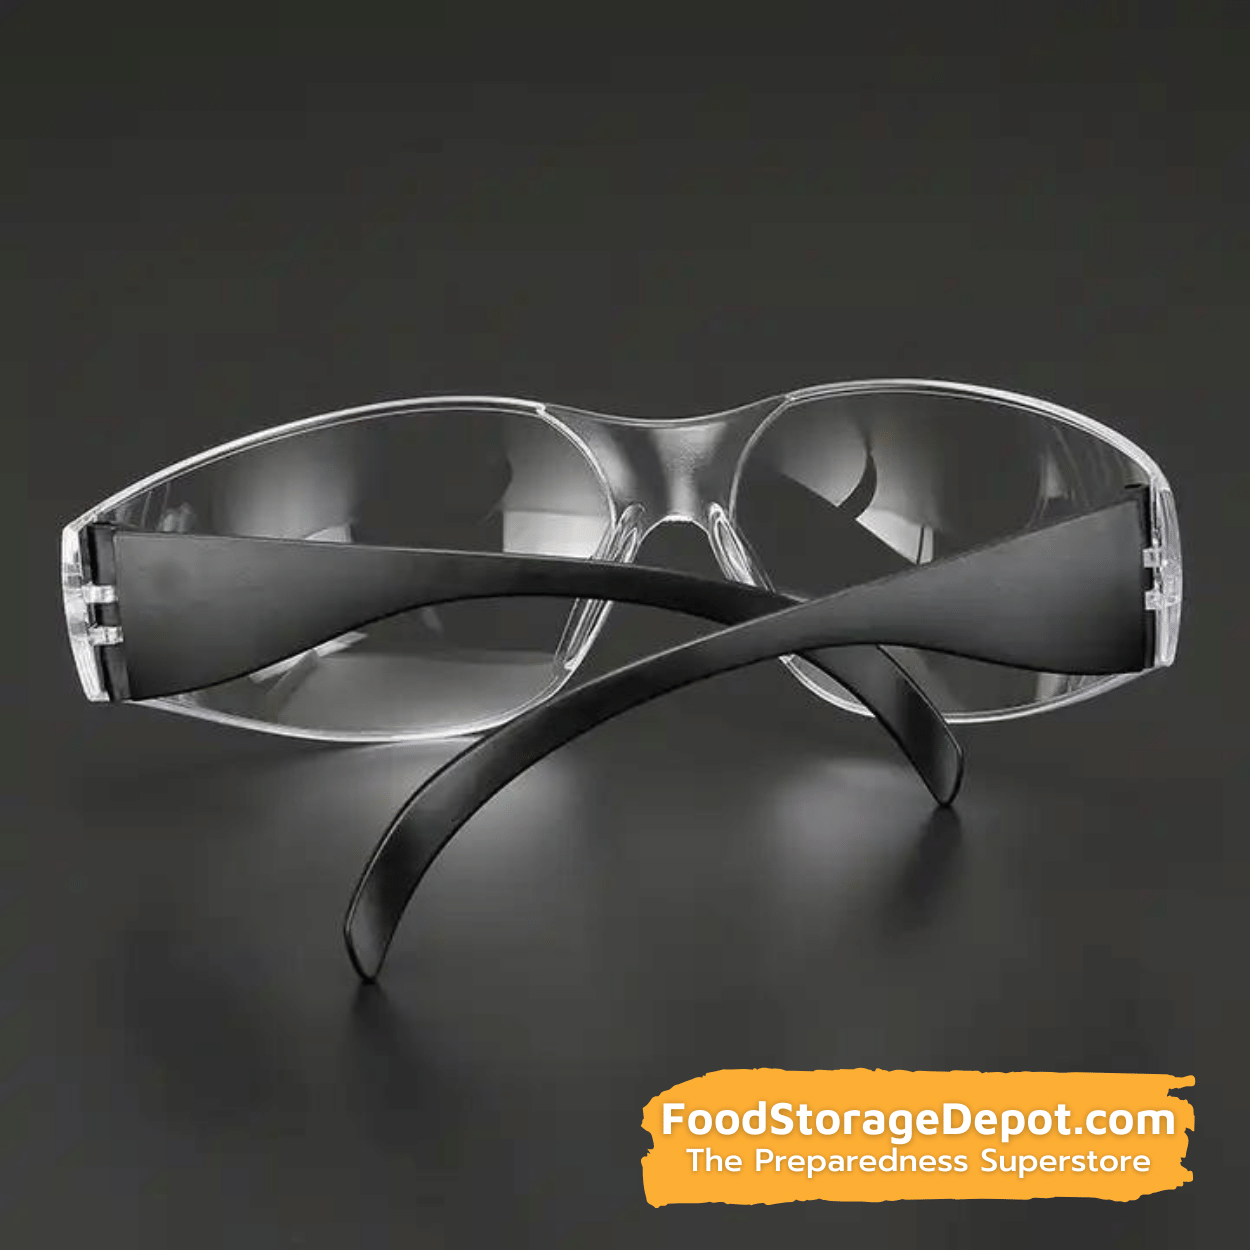 ANSI Approved Plastic Safety Glasses (Anti-Scratch and Anti-Fog)